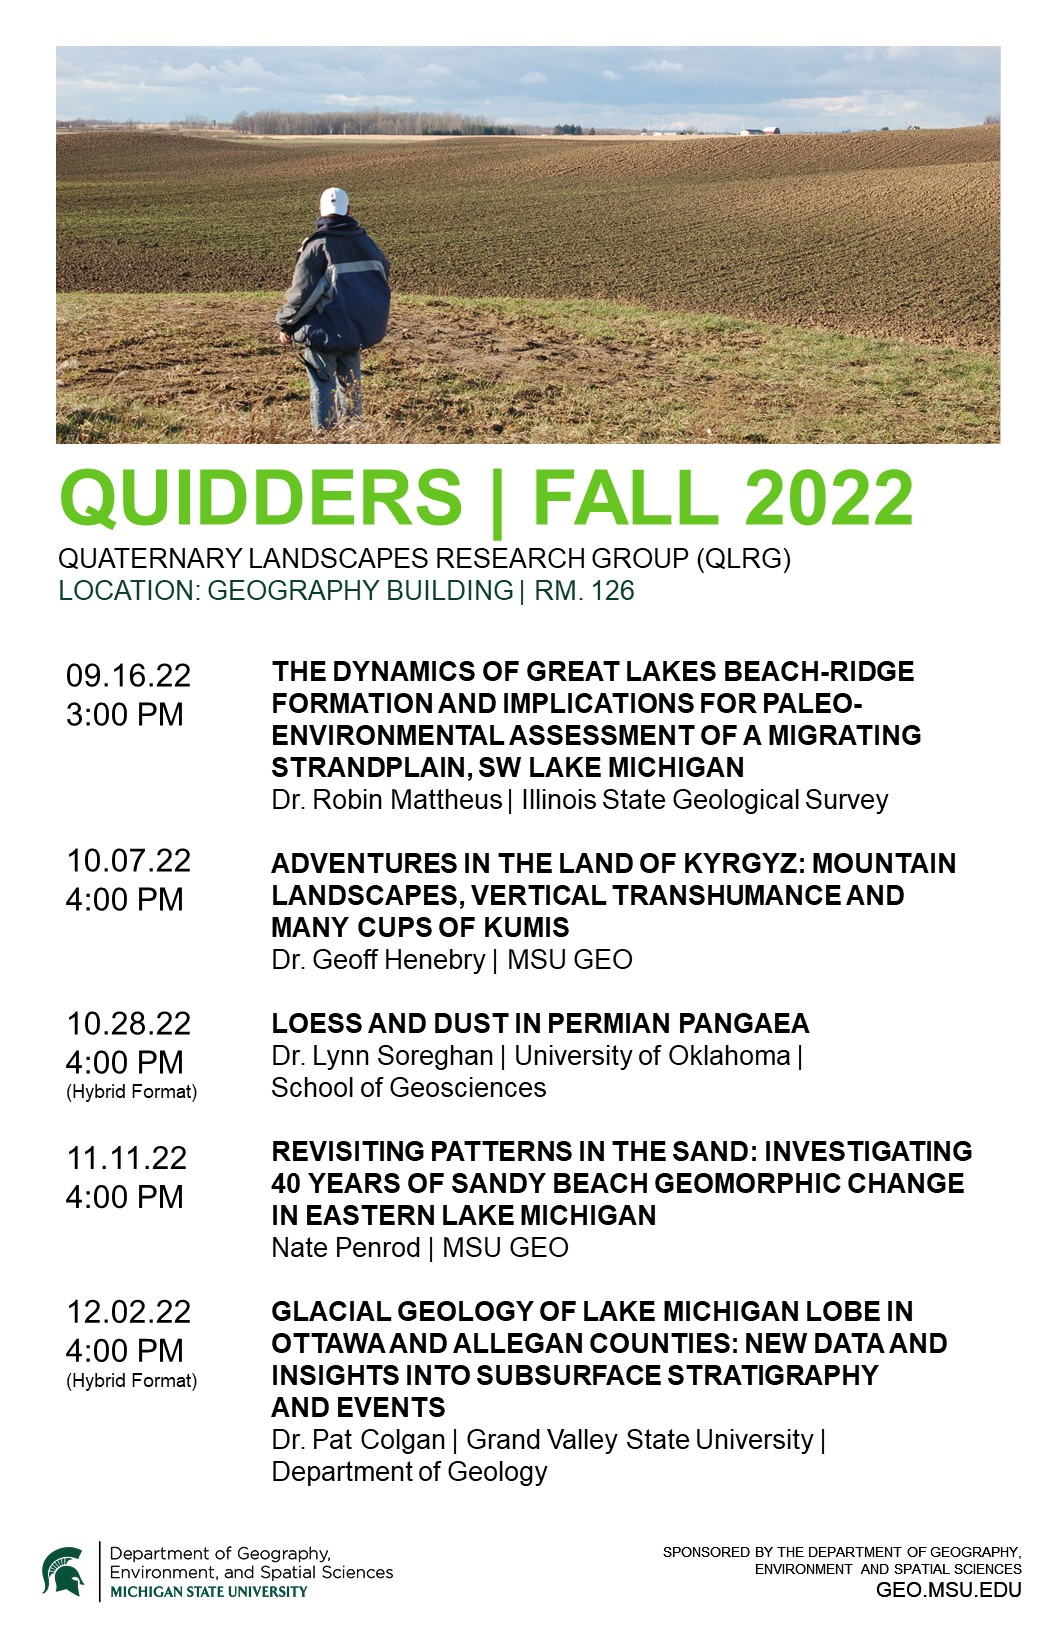 Flyer for Fall 2022 Quidders Series